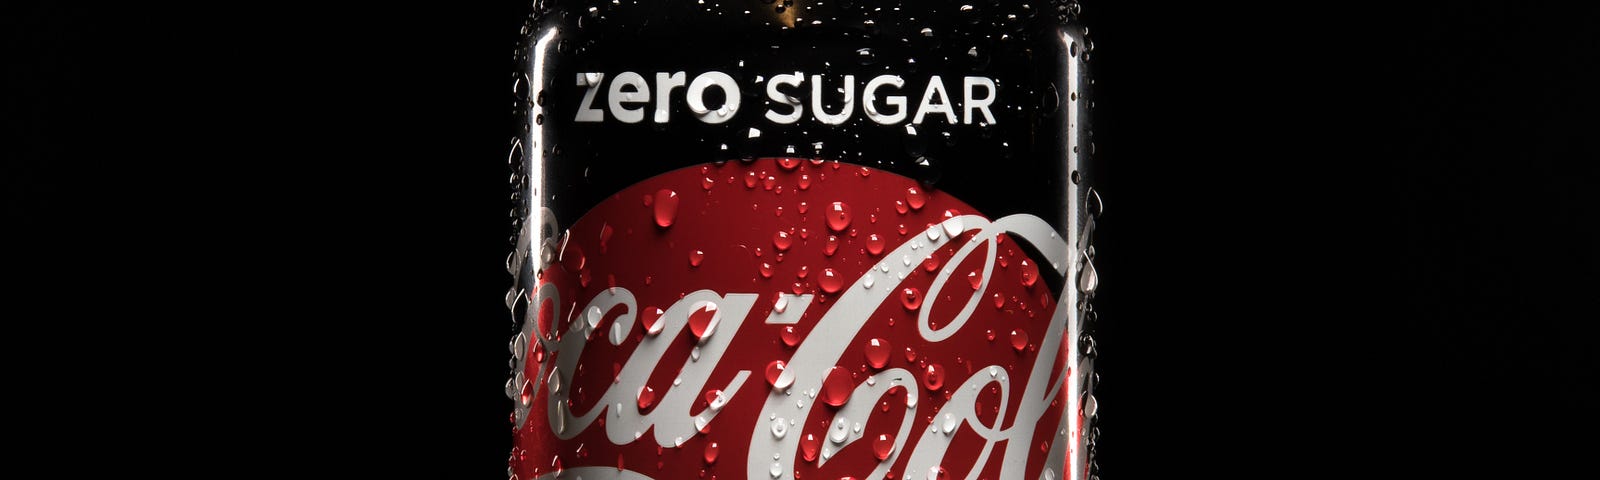 A can of Coca-Cola Zero Sugar (red, white, and black) stands in front of a black background.